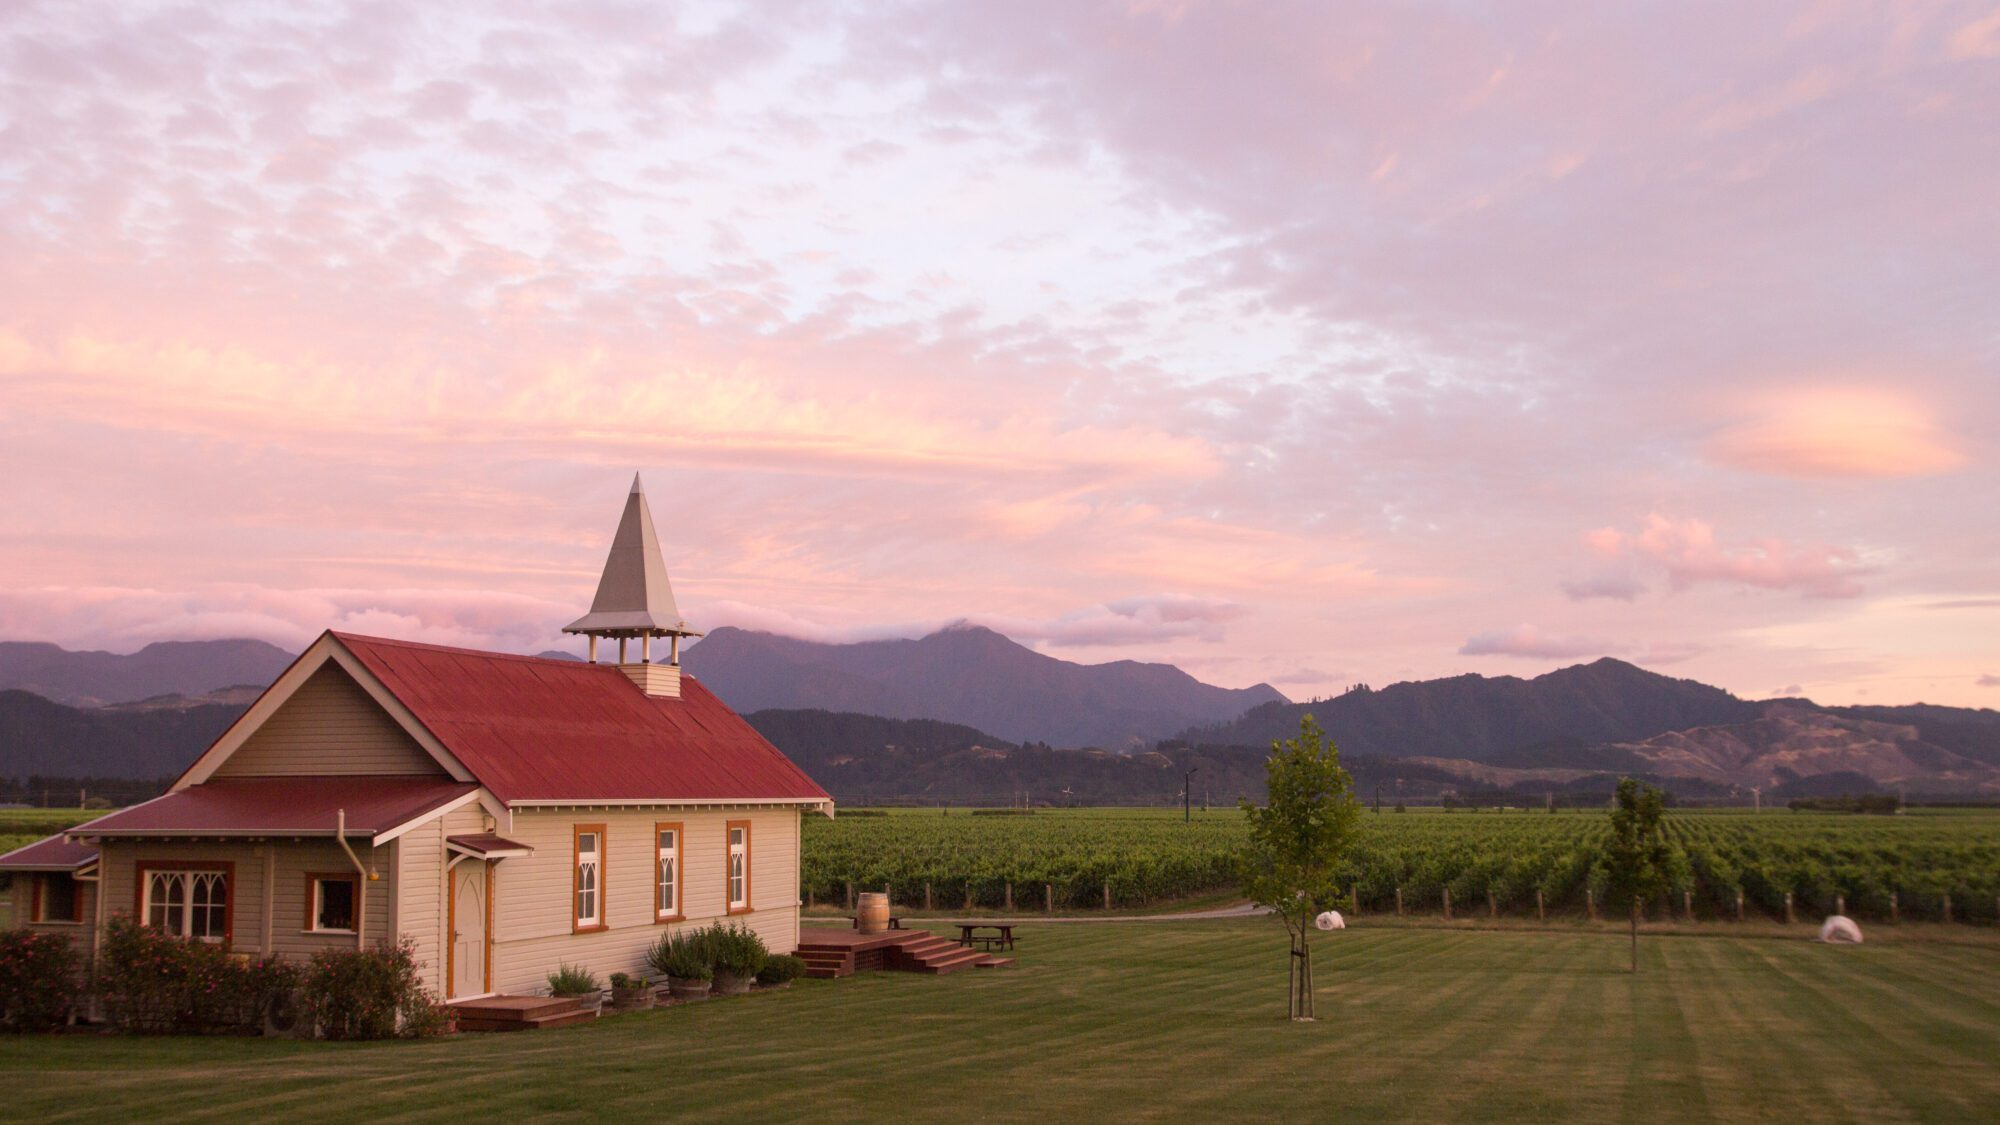 A wine-lover’s road trip: 10 fantastic wineries to visit in New Zealand